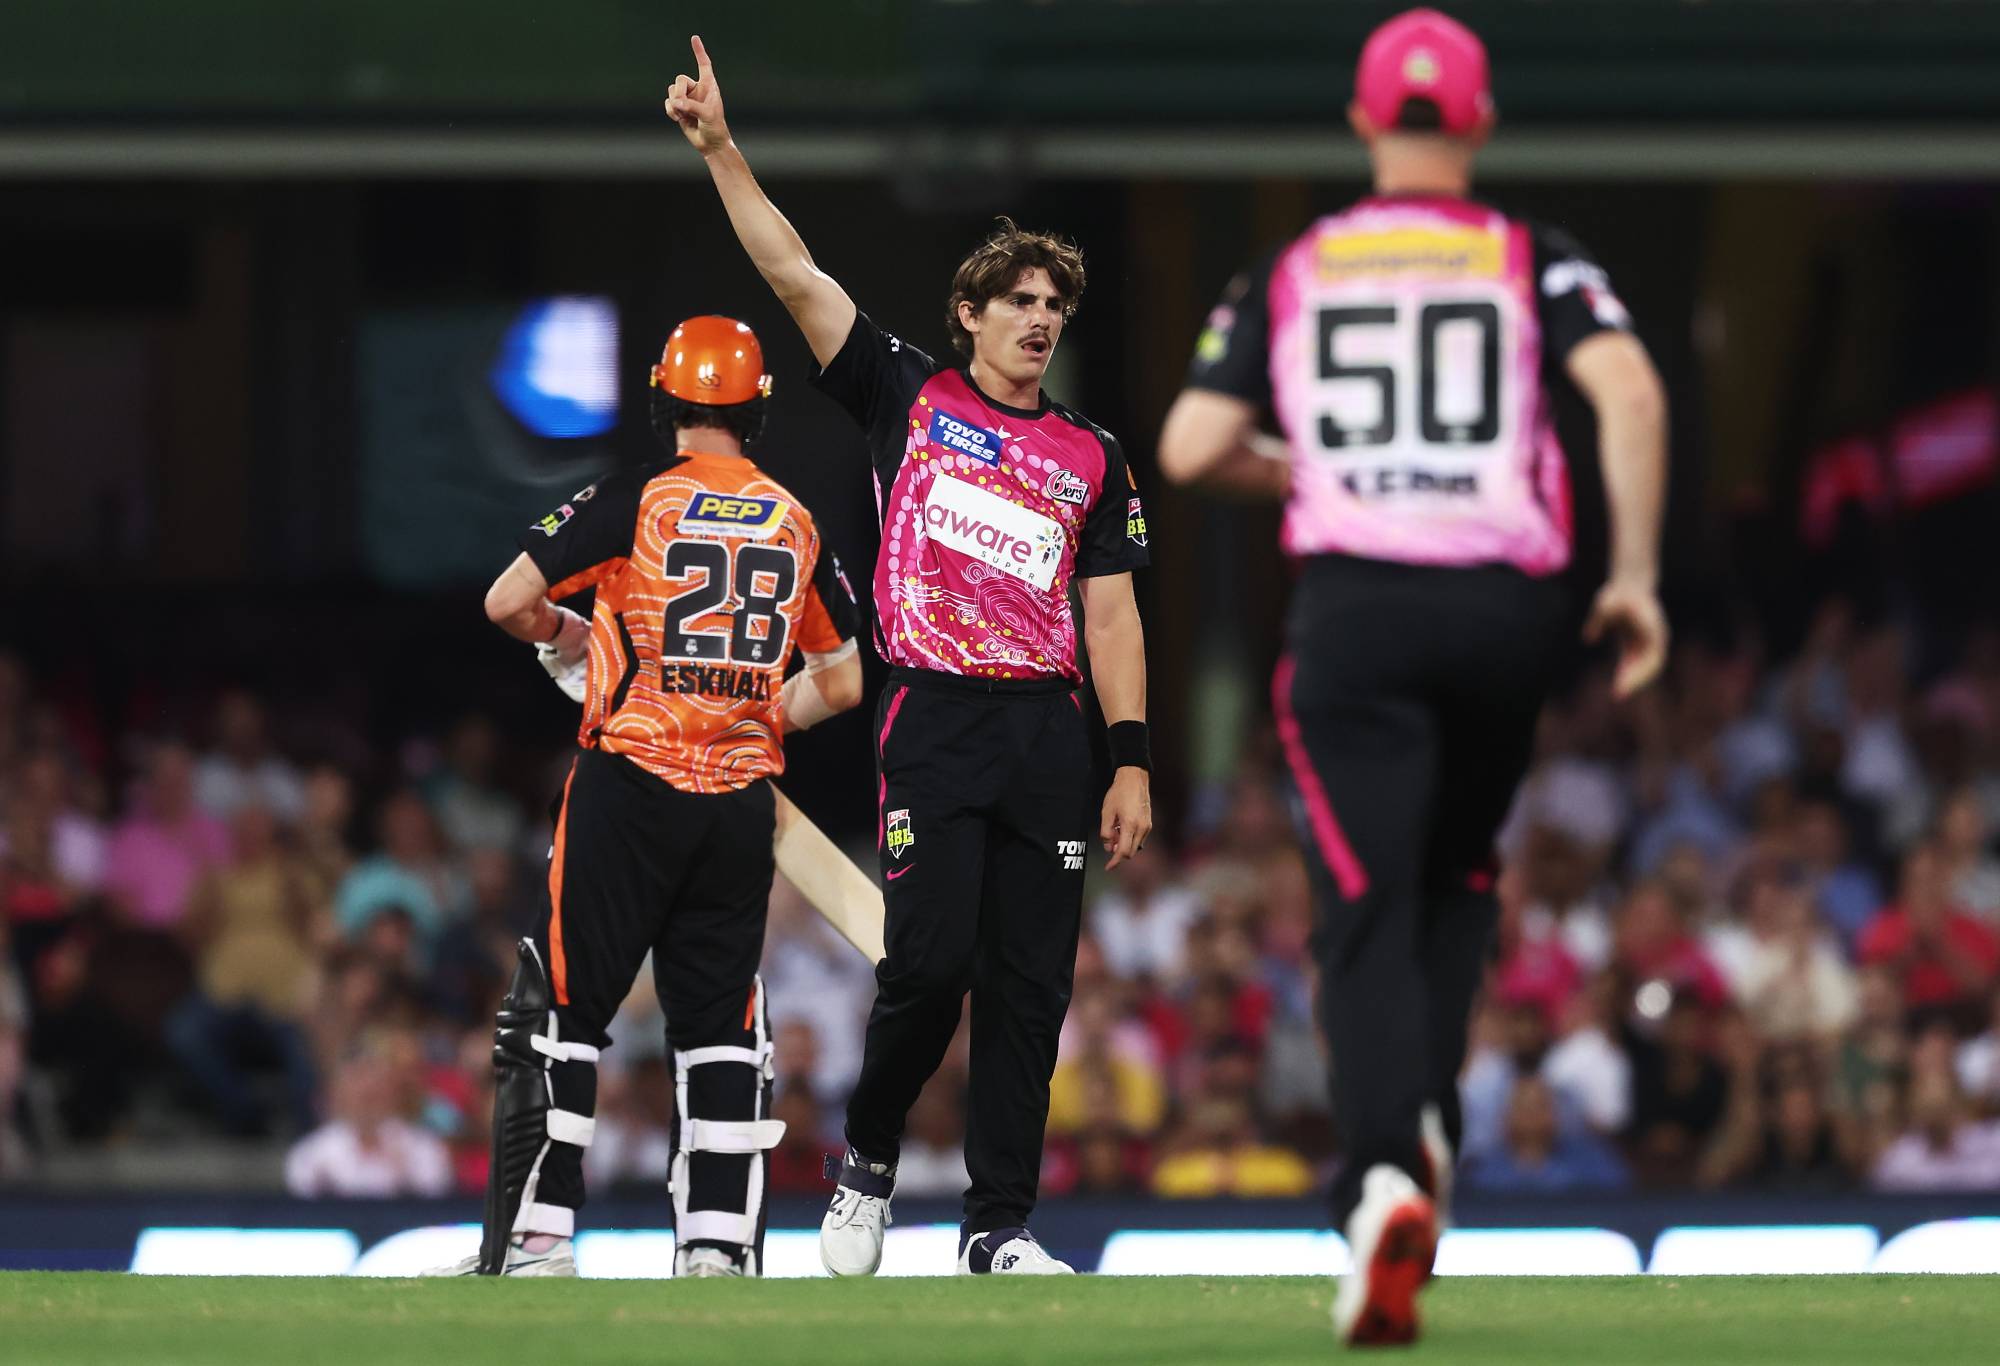 SYDNEY, AUSTRALIA - JANUARY 15: Sean Abbott of the Sixers celebrates taking the wicket of Aaron Hardie of the Scorchers during the Men's Big Bash League match between the Sydney Sixers and the Perth Scorchers at Sydney Cricket Ground, on January 15, 2023, in Sydney, Australia. (Photo by Matt King/Getty Images)